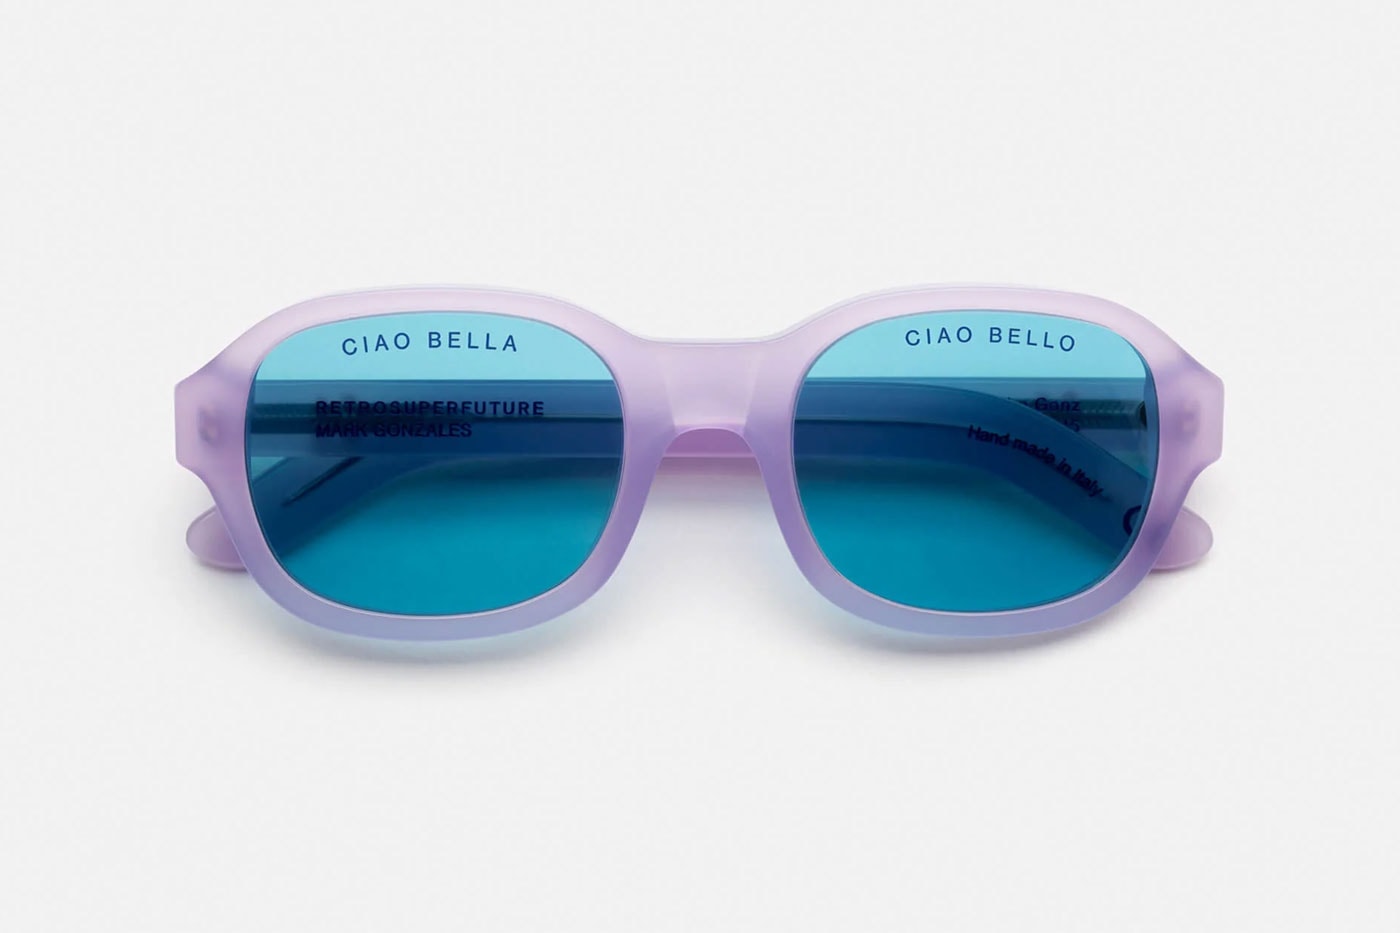 Retrosuperfuture Mark Gonzales II made in italy collaboration skateboarding sunglasses purple blue translucent rounded acetate ciao bello bella rsf release info date price